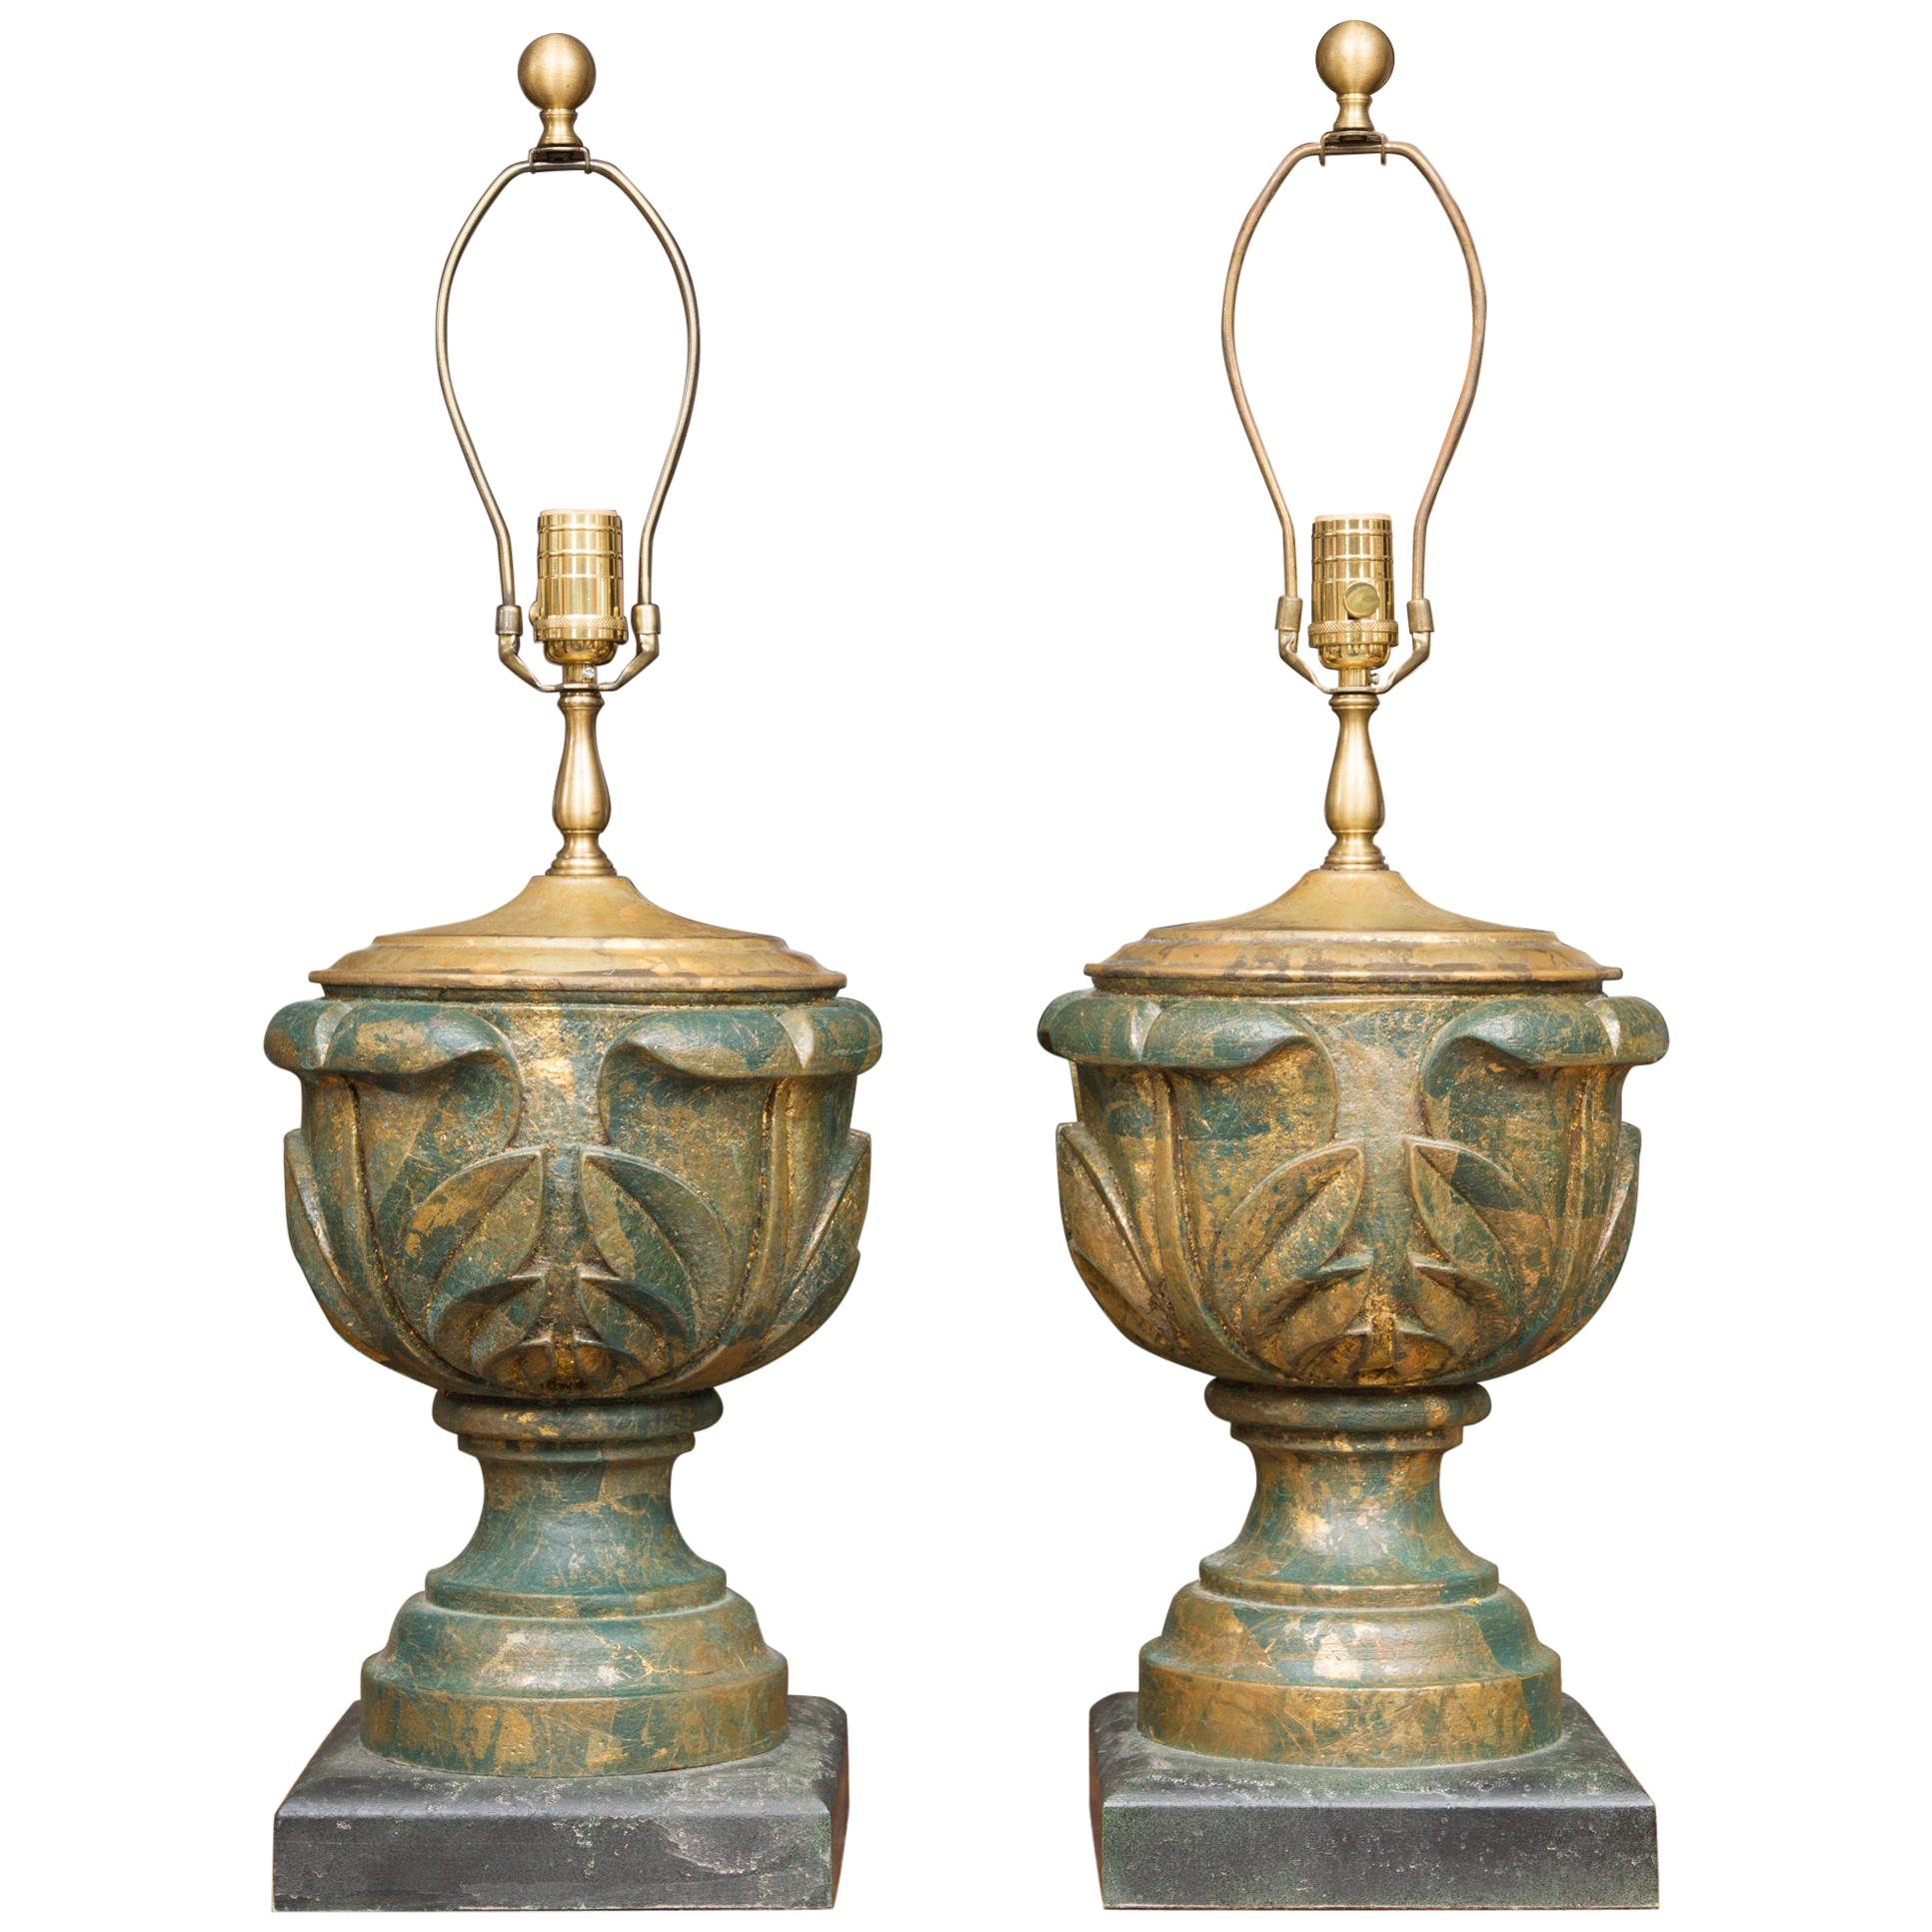  Neoclassical Table Lamps